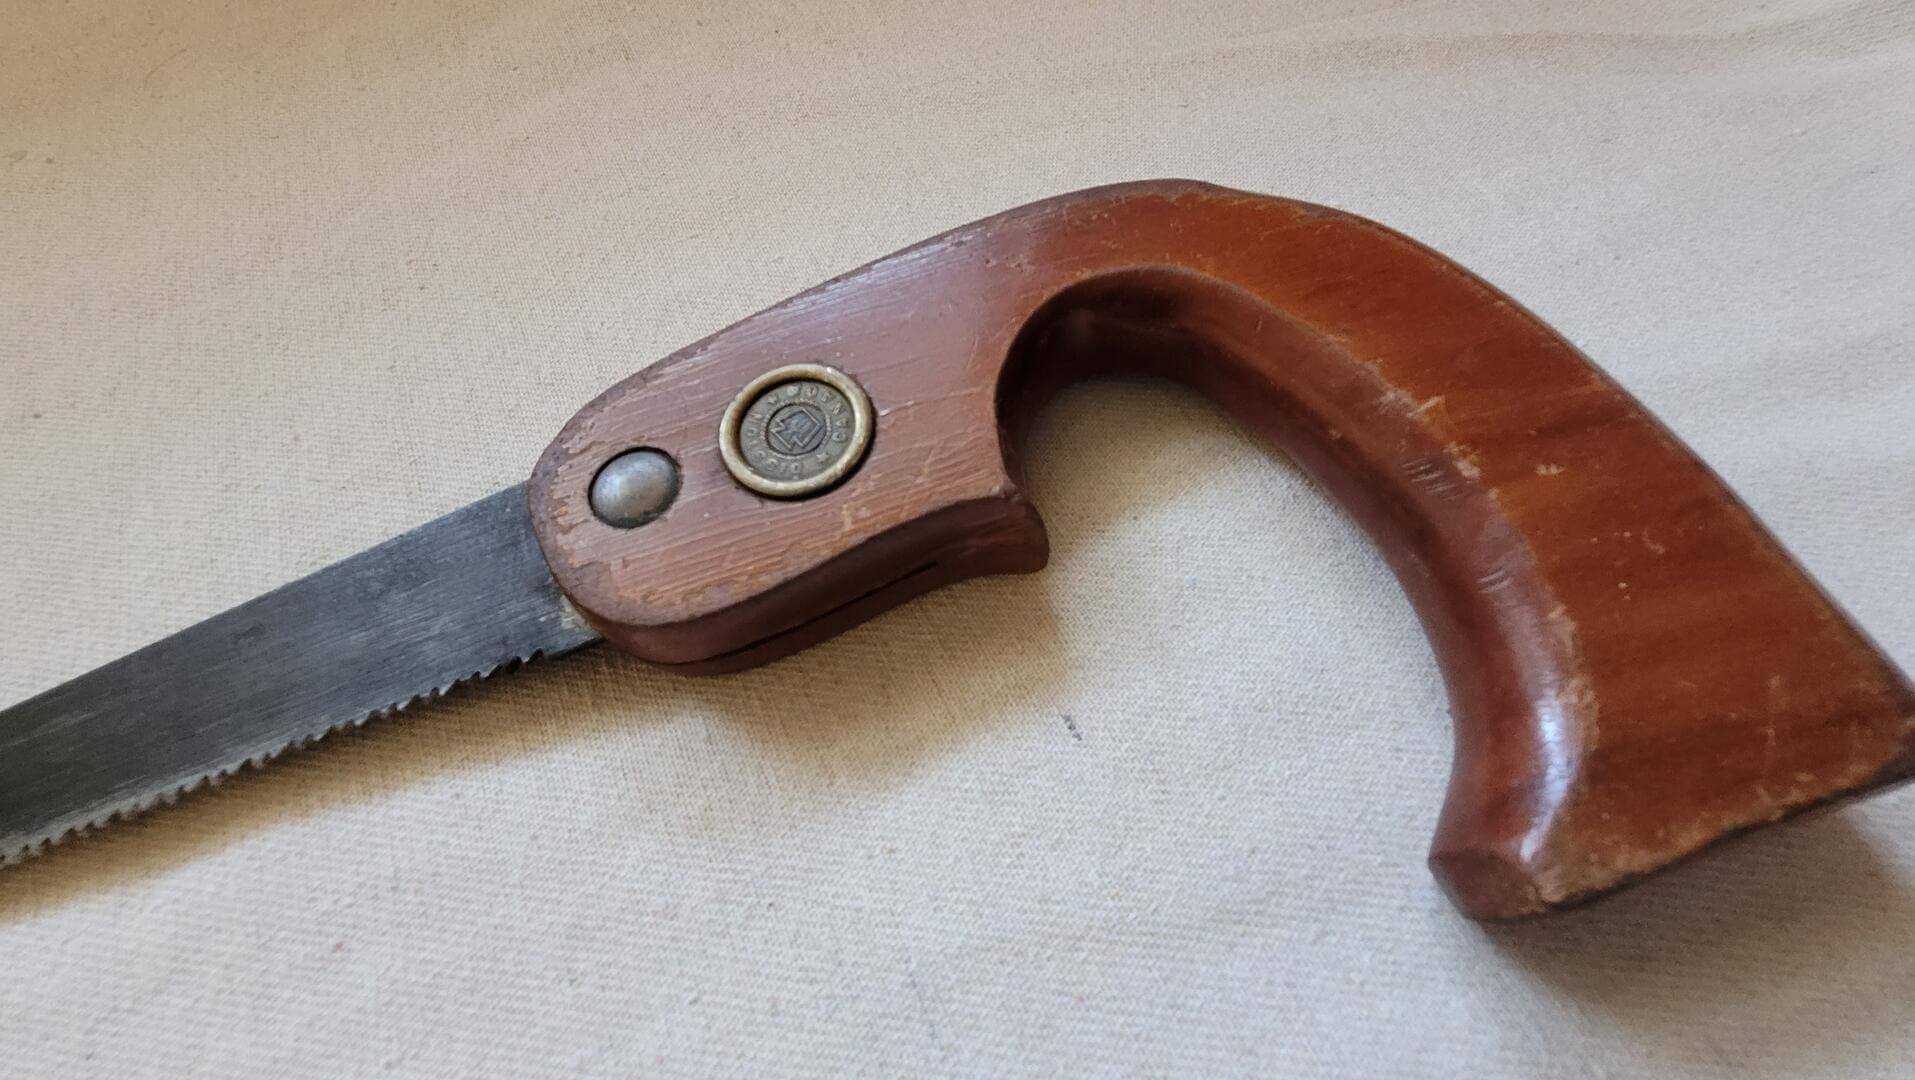 Vintage Disston Canada Compass Keyhole Saw 12 Inch Blade Toronto ON - Antique Collectible Woodworking and Carpentry Canadiana Tools